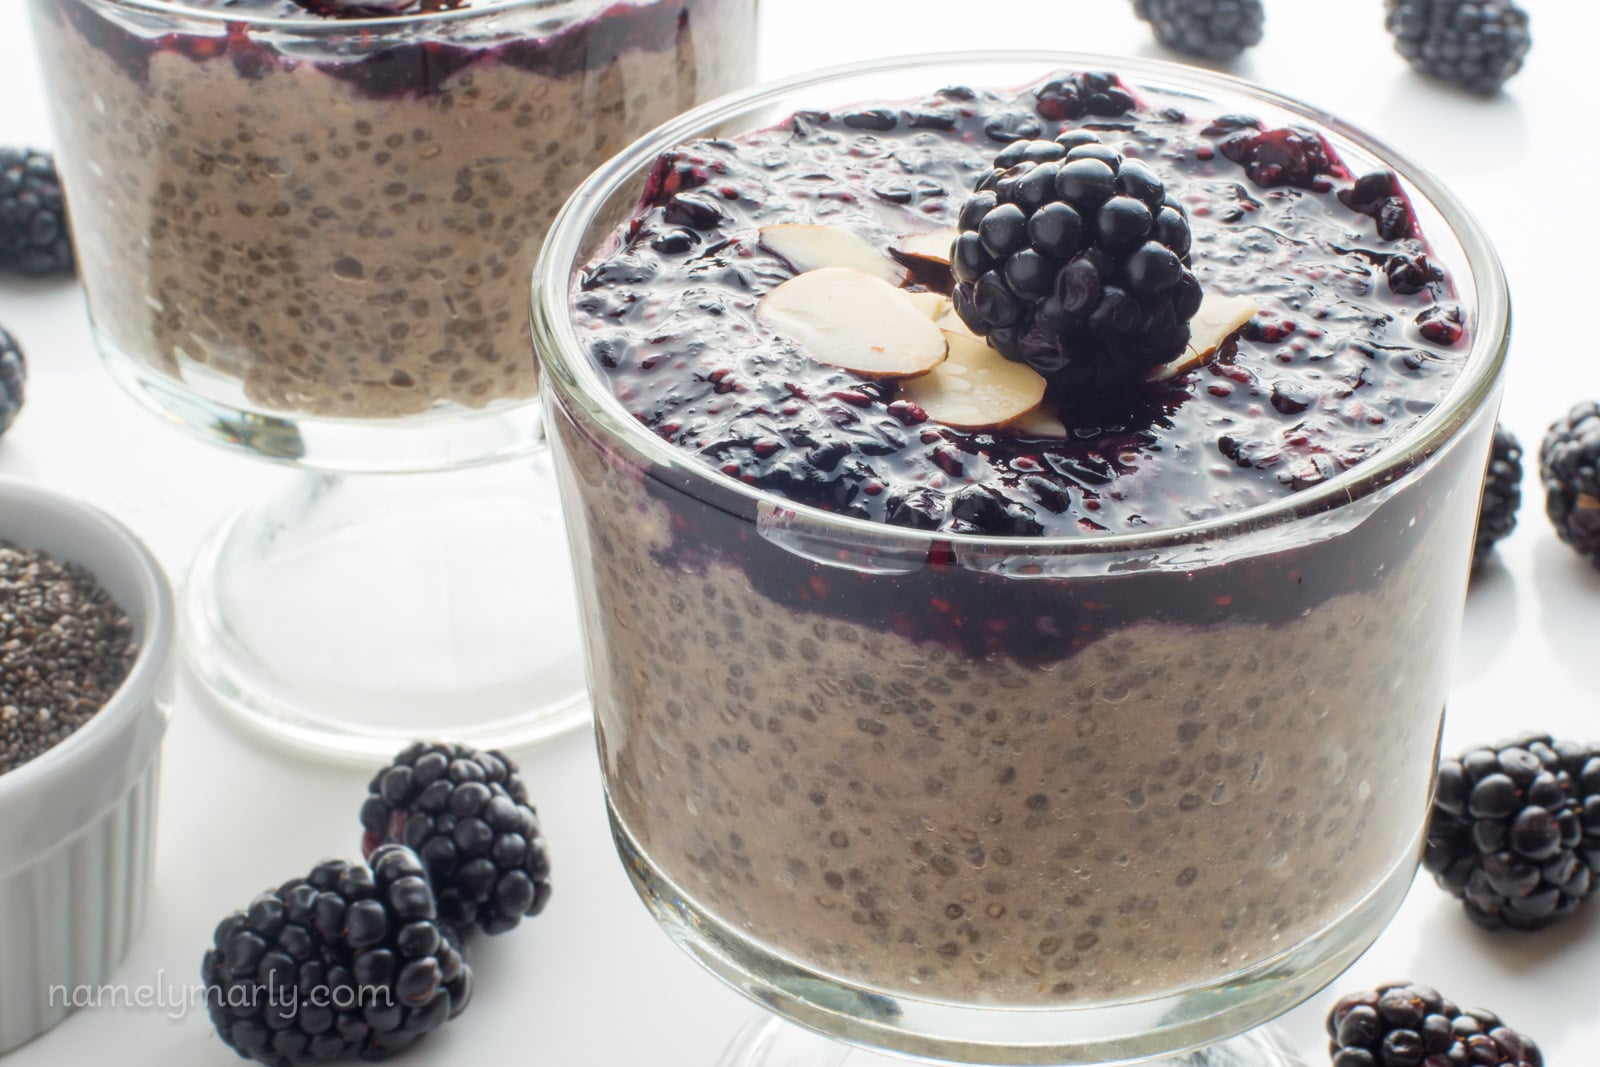 A glass serving dish holds bananas chia pudding with blackberry sauce on top.